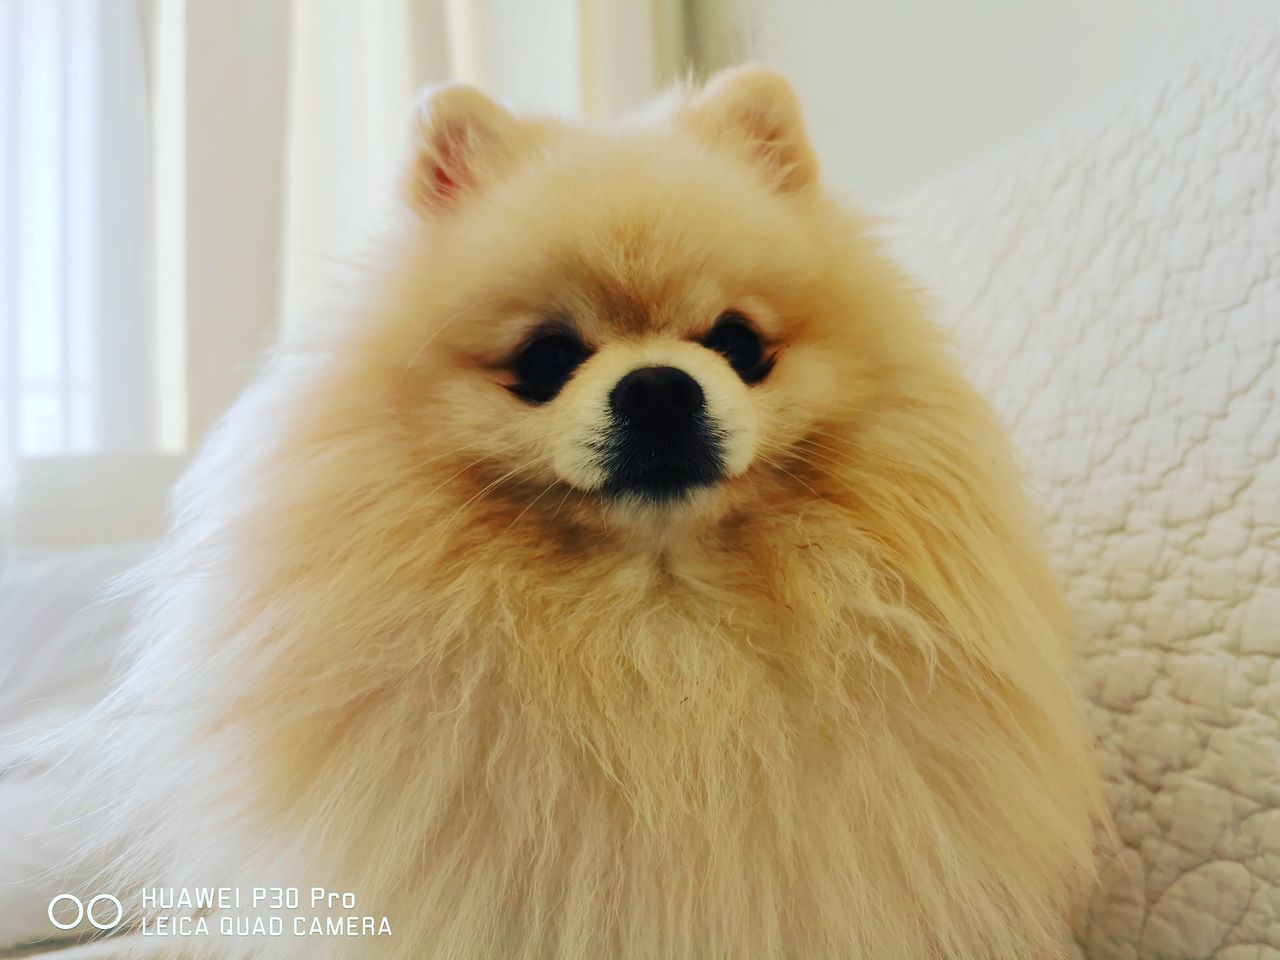 one animal, domestic, mammal, animal, pets, animal themes, dog, canine, domestic animals, indoors, vertebrate, pomeranian, no people, home interior, white color, close-up, animal hair, hair, relaxation, portrait, small, animal head